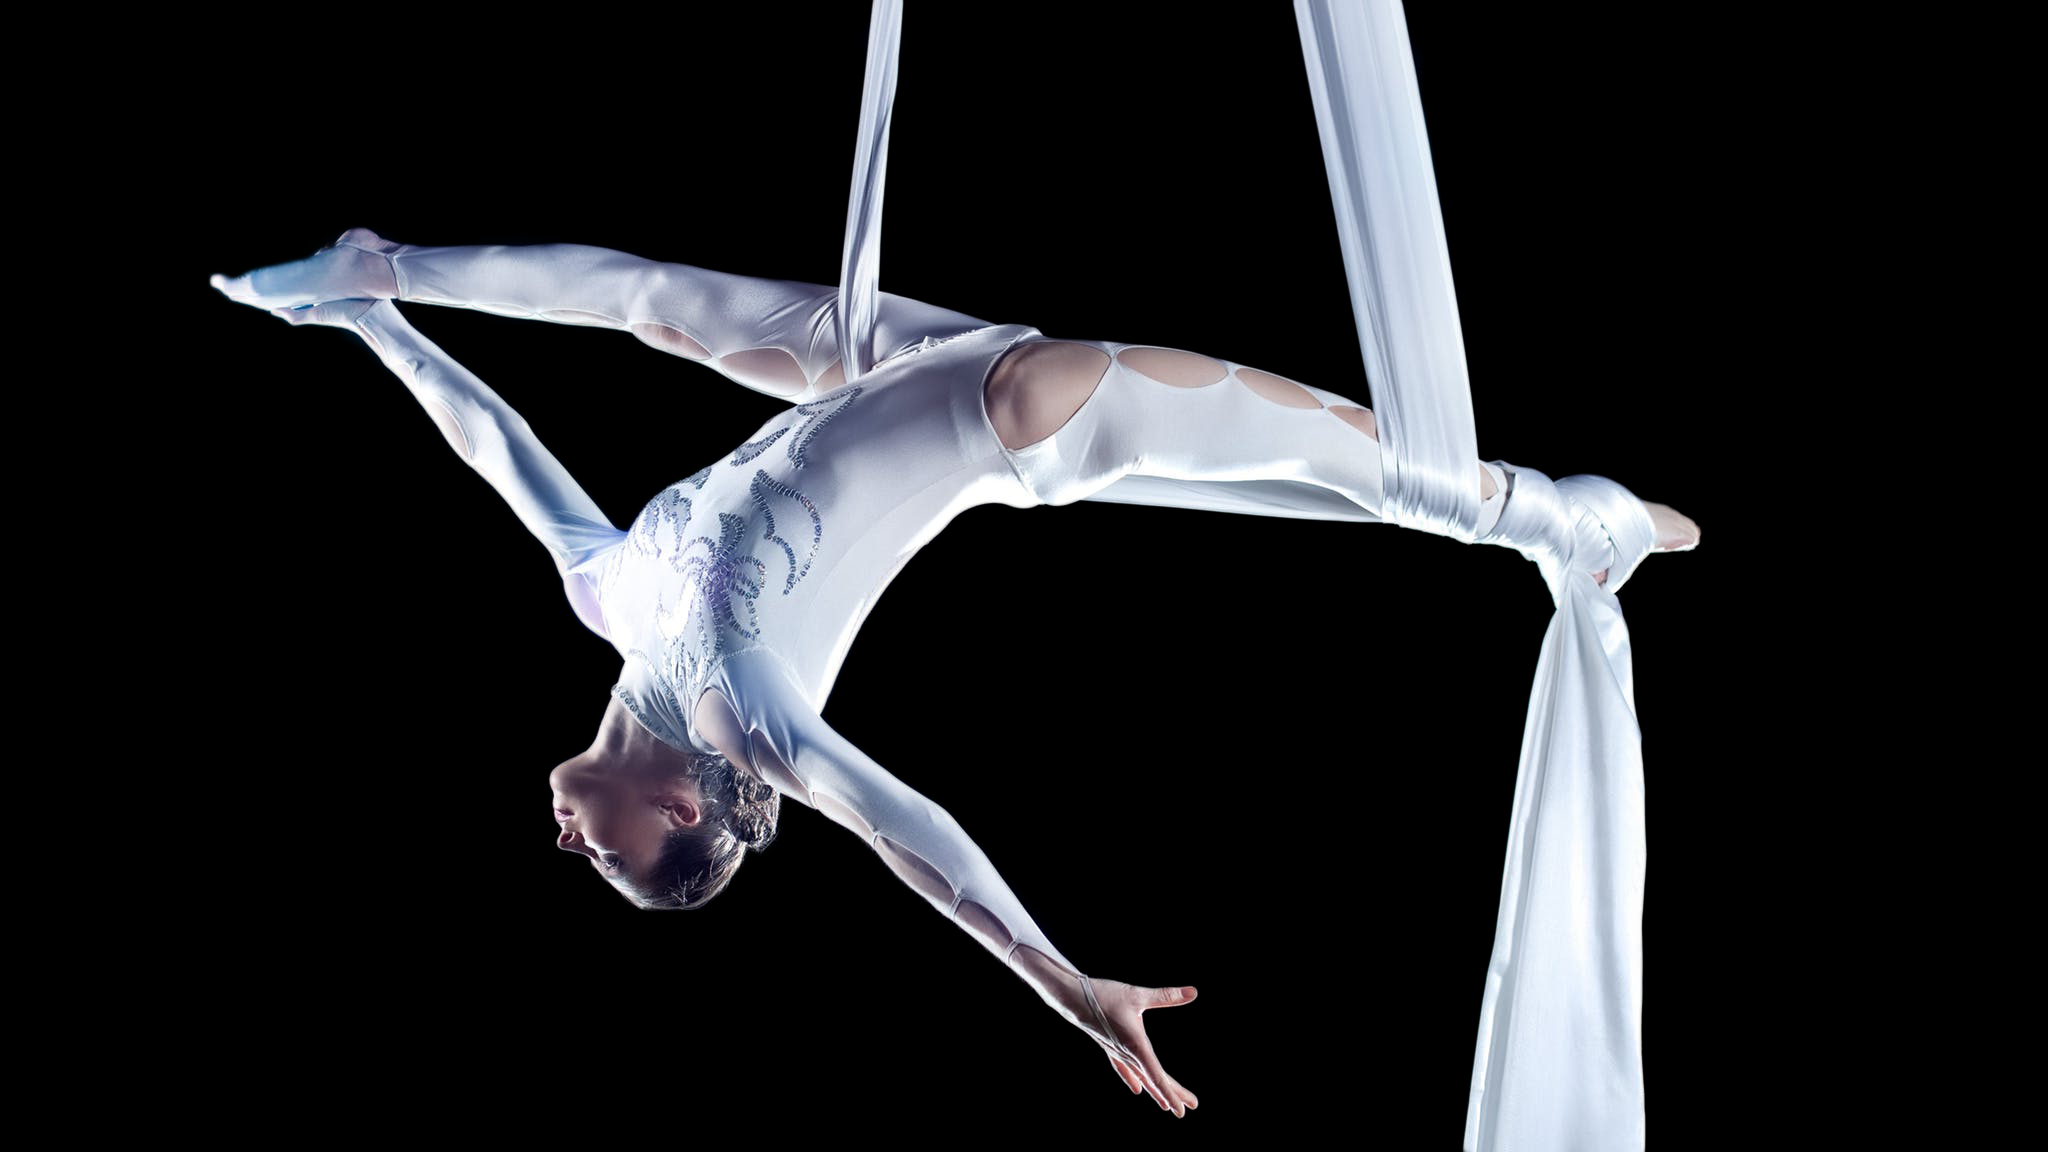 A beautiful acrobat in white performing a routine on silks